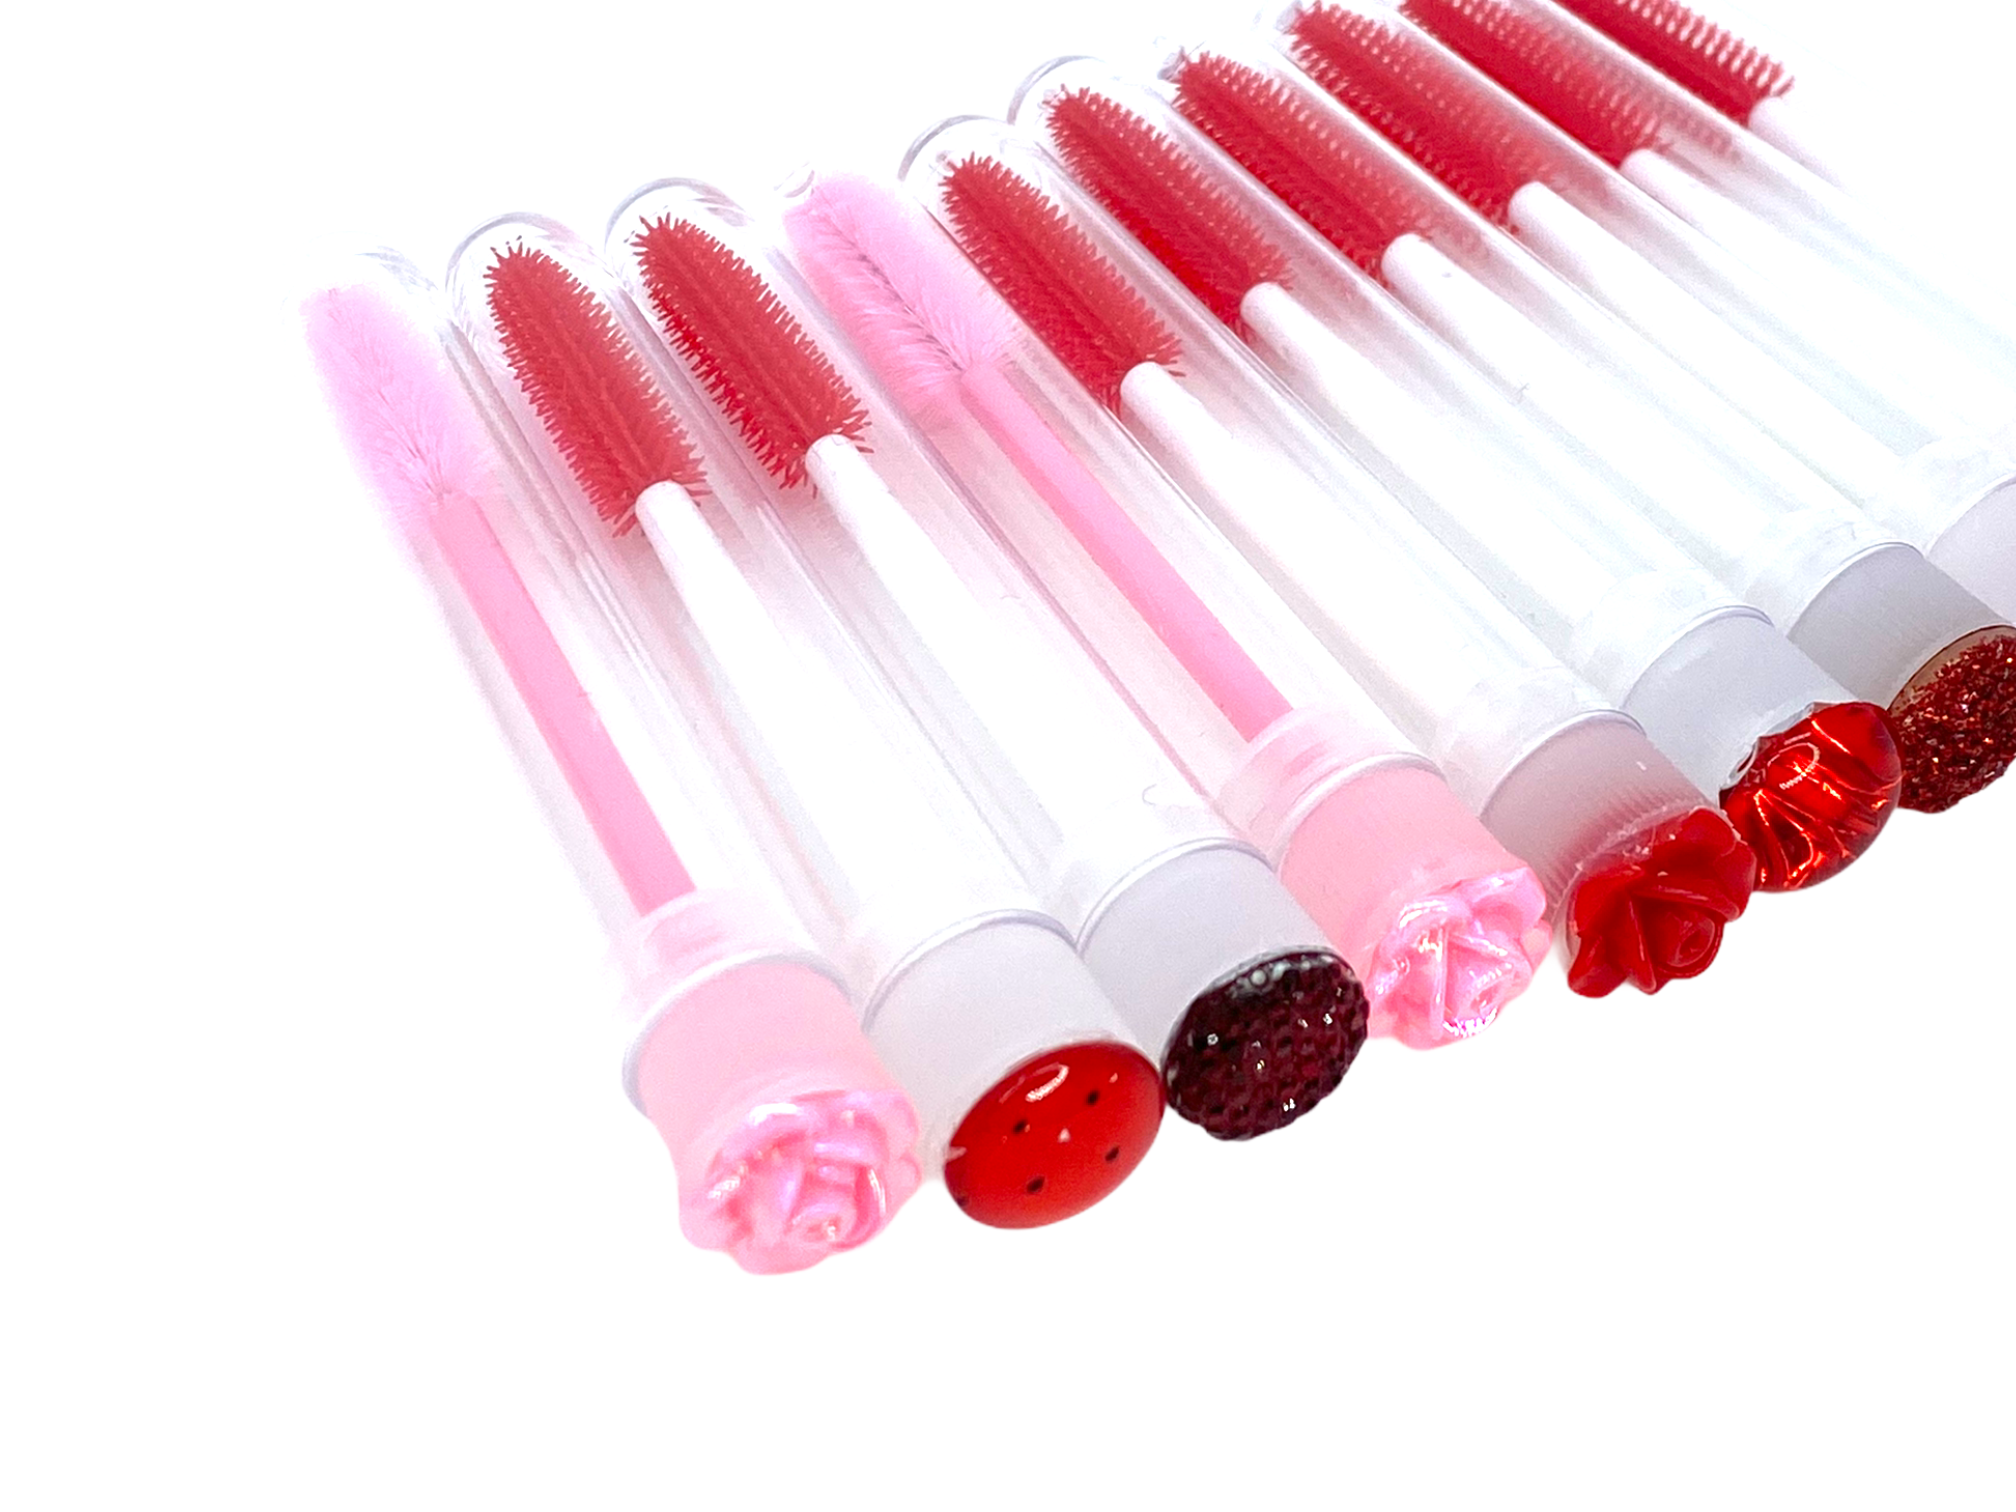 Mixed Red/Pink Eyelash Wands with cover